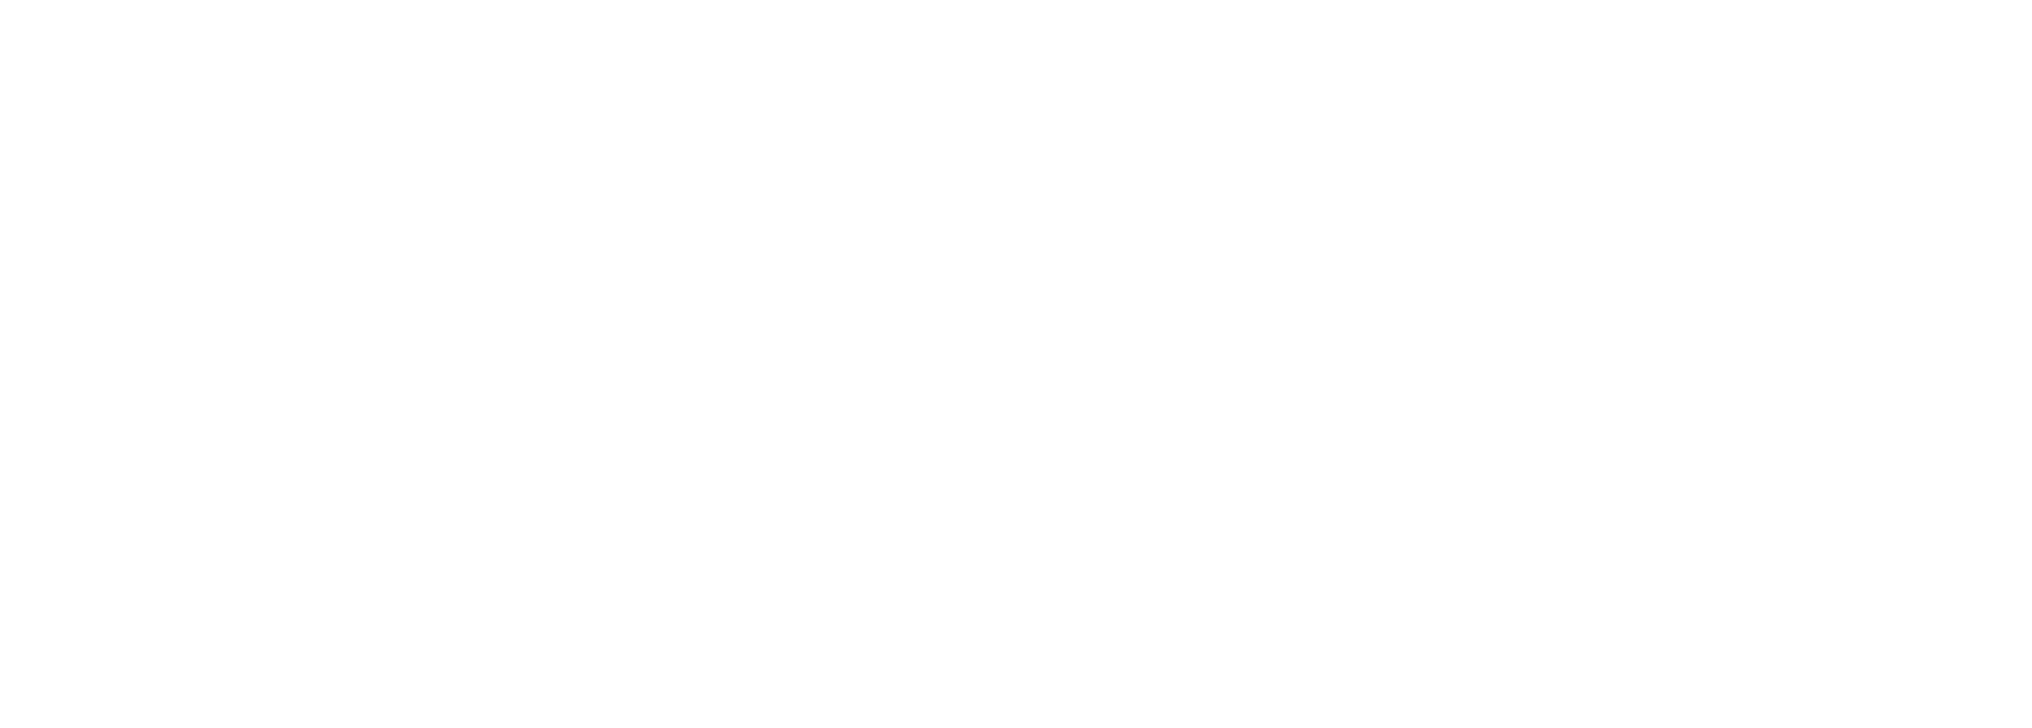 The Heritage Real Estate Group | Brokered by eXp Realty